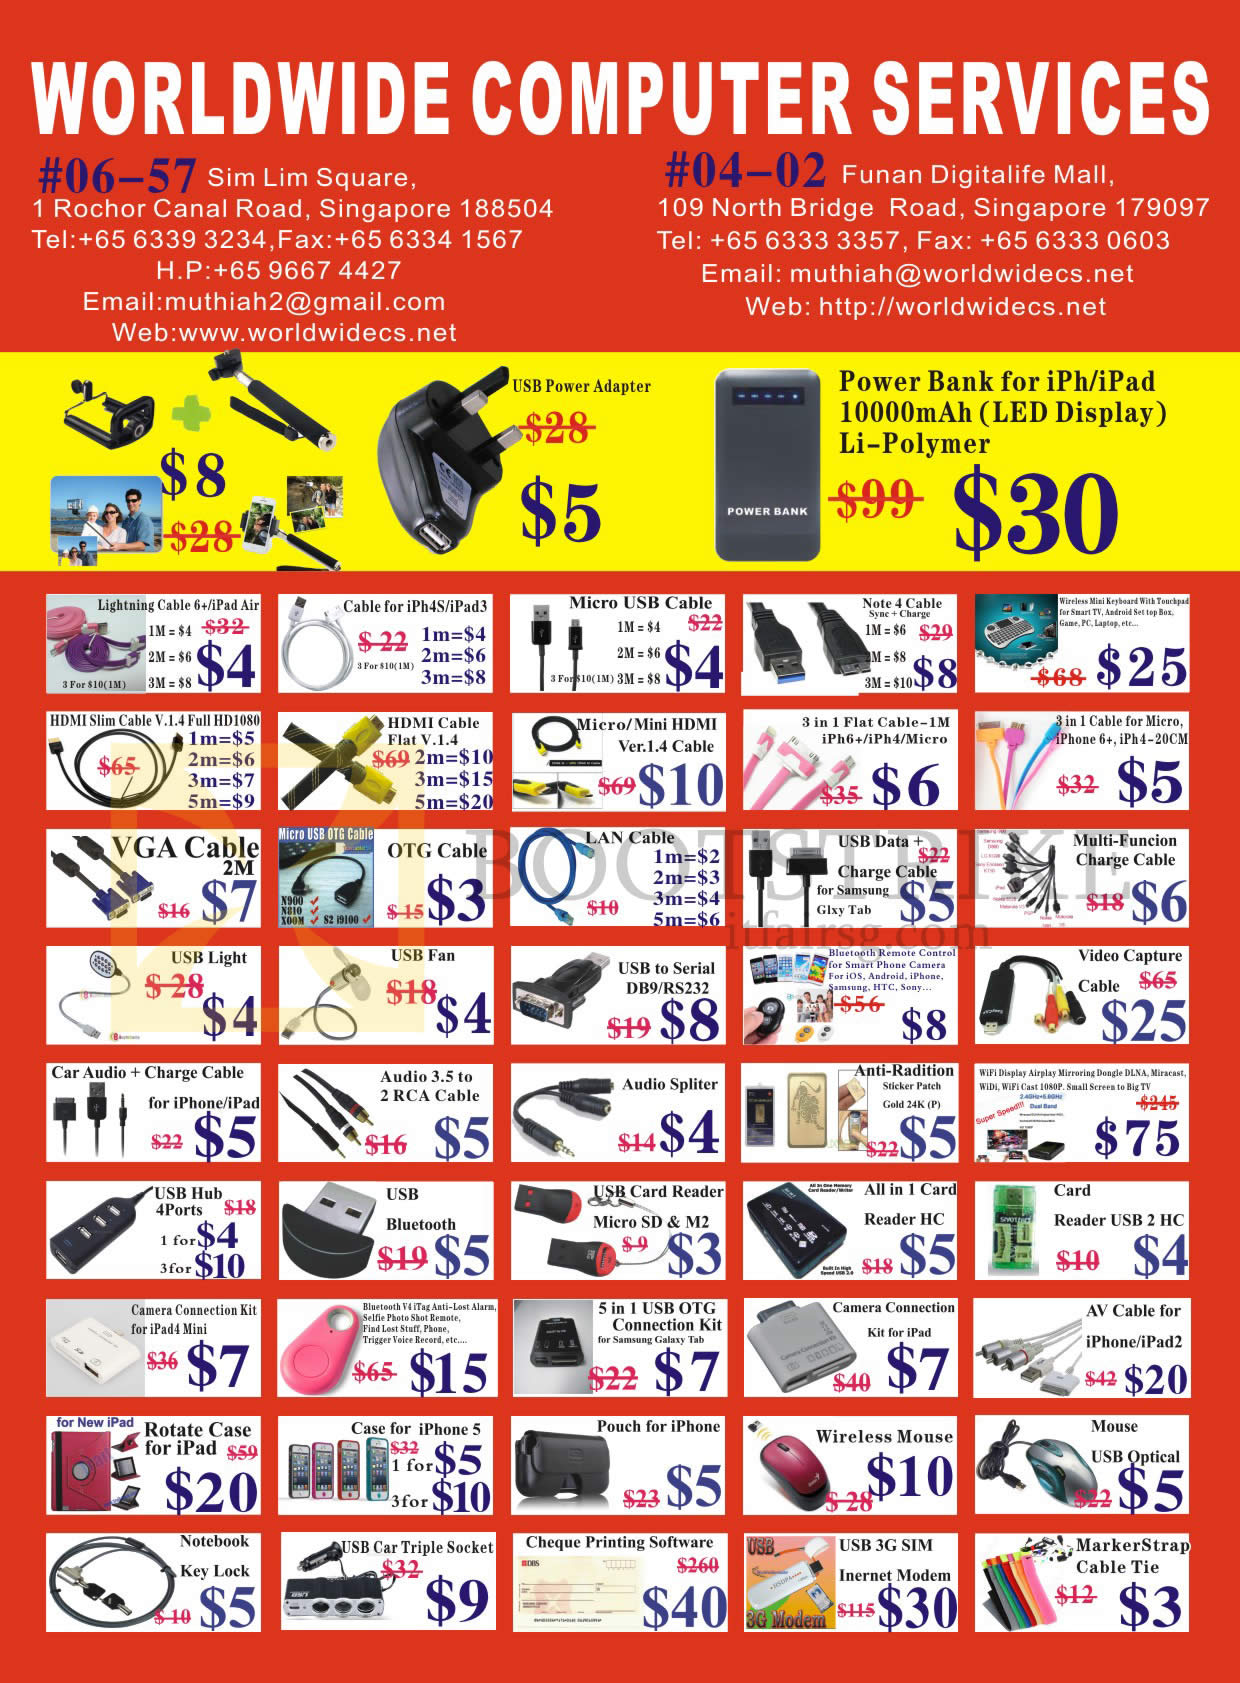 IT SHOW 2015 price list image brochure of Worldwide Computer Services Cables, Pouches, Cases, Mouse, USB Hub, Card Readers